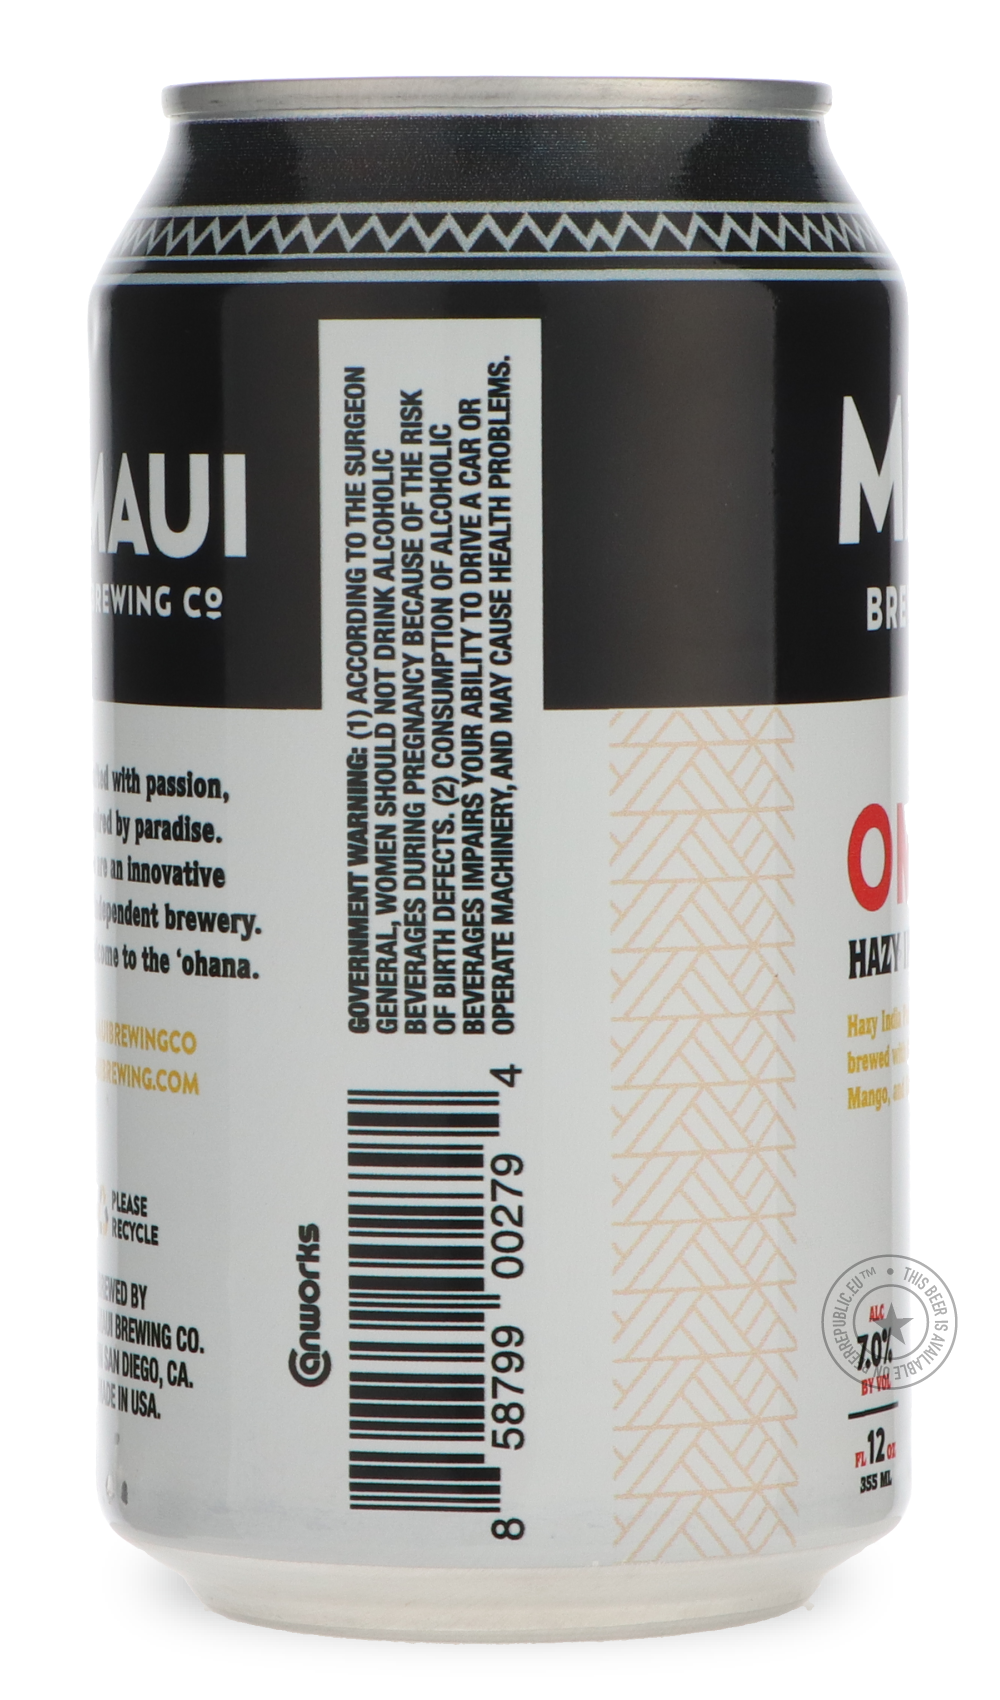 -Maui- OMG Hazy-IPA- Only @ Beer Republic - The best online beer store for American & Canadian craft beer - Buy beer online from the USA and Canada - Bier online kopen - Amerikaans bier kopen - Craft beer store - Craft beer kopen - Amerikanisch bier kaufen - Bier online kaufen - Acheter biere online - IPA - Stout - Porter - New England IPA - Hazy IPA - Imperial Stout - Barrel Aged - Barrel Aged Imperial Stout - Brown - Dark beer - Blond - Blonde - Pilsner - Lager - Wheat - Weizen - Amber - Barley Wine - Qua